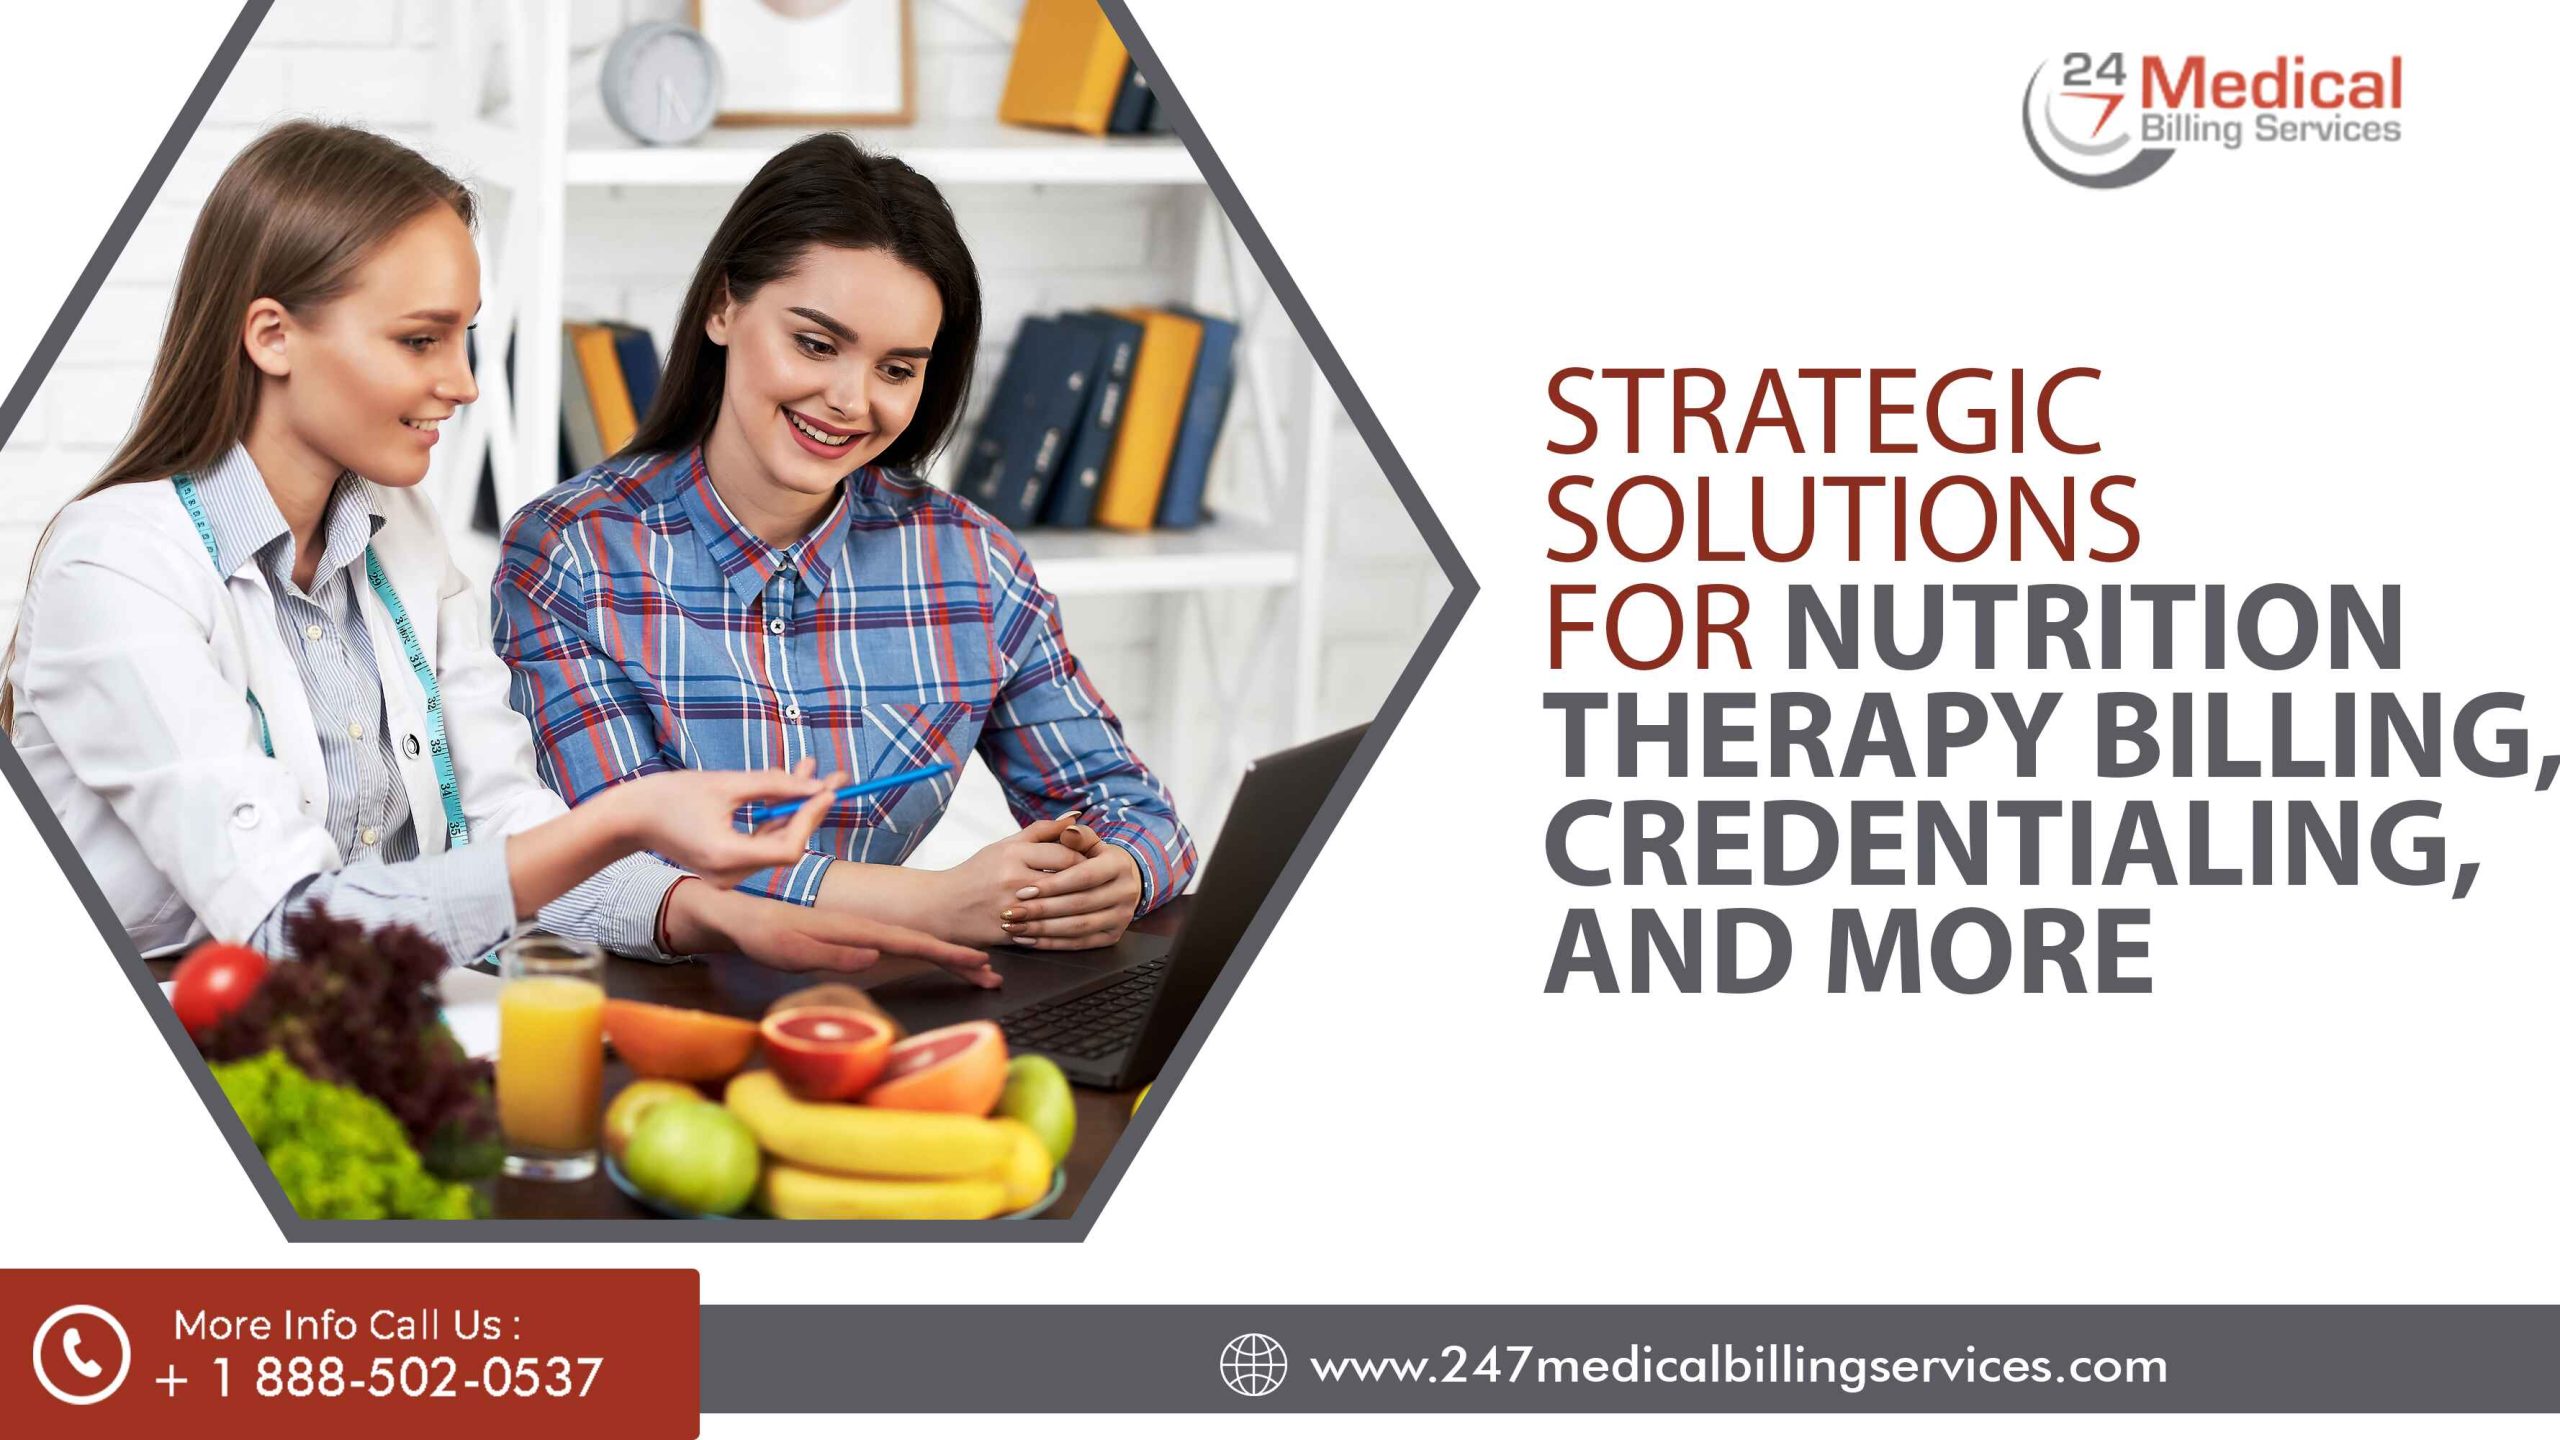  Strategic Solutions for Nutrition as Therapy Billing, Credentialing, and More